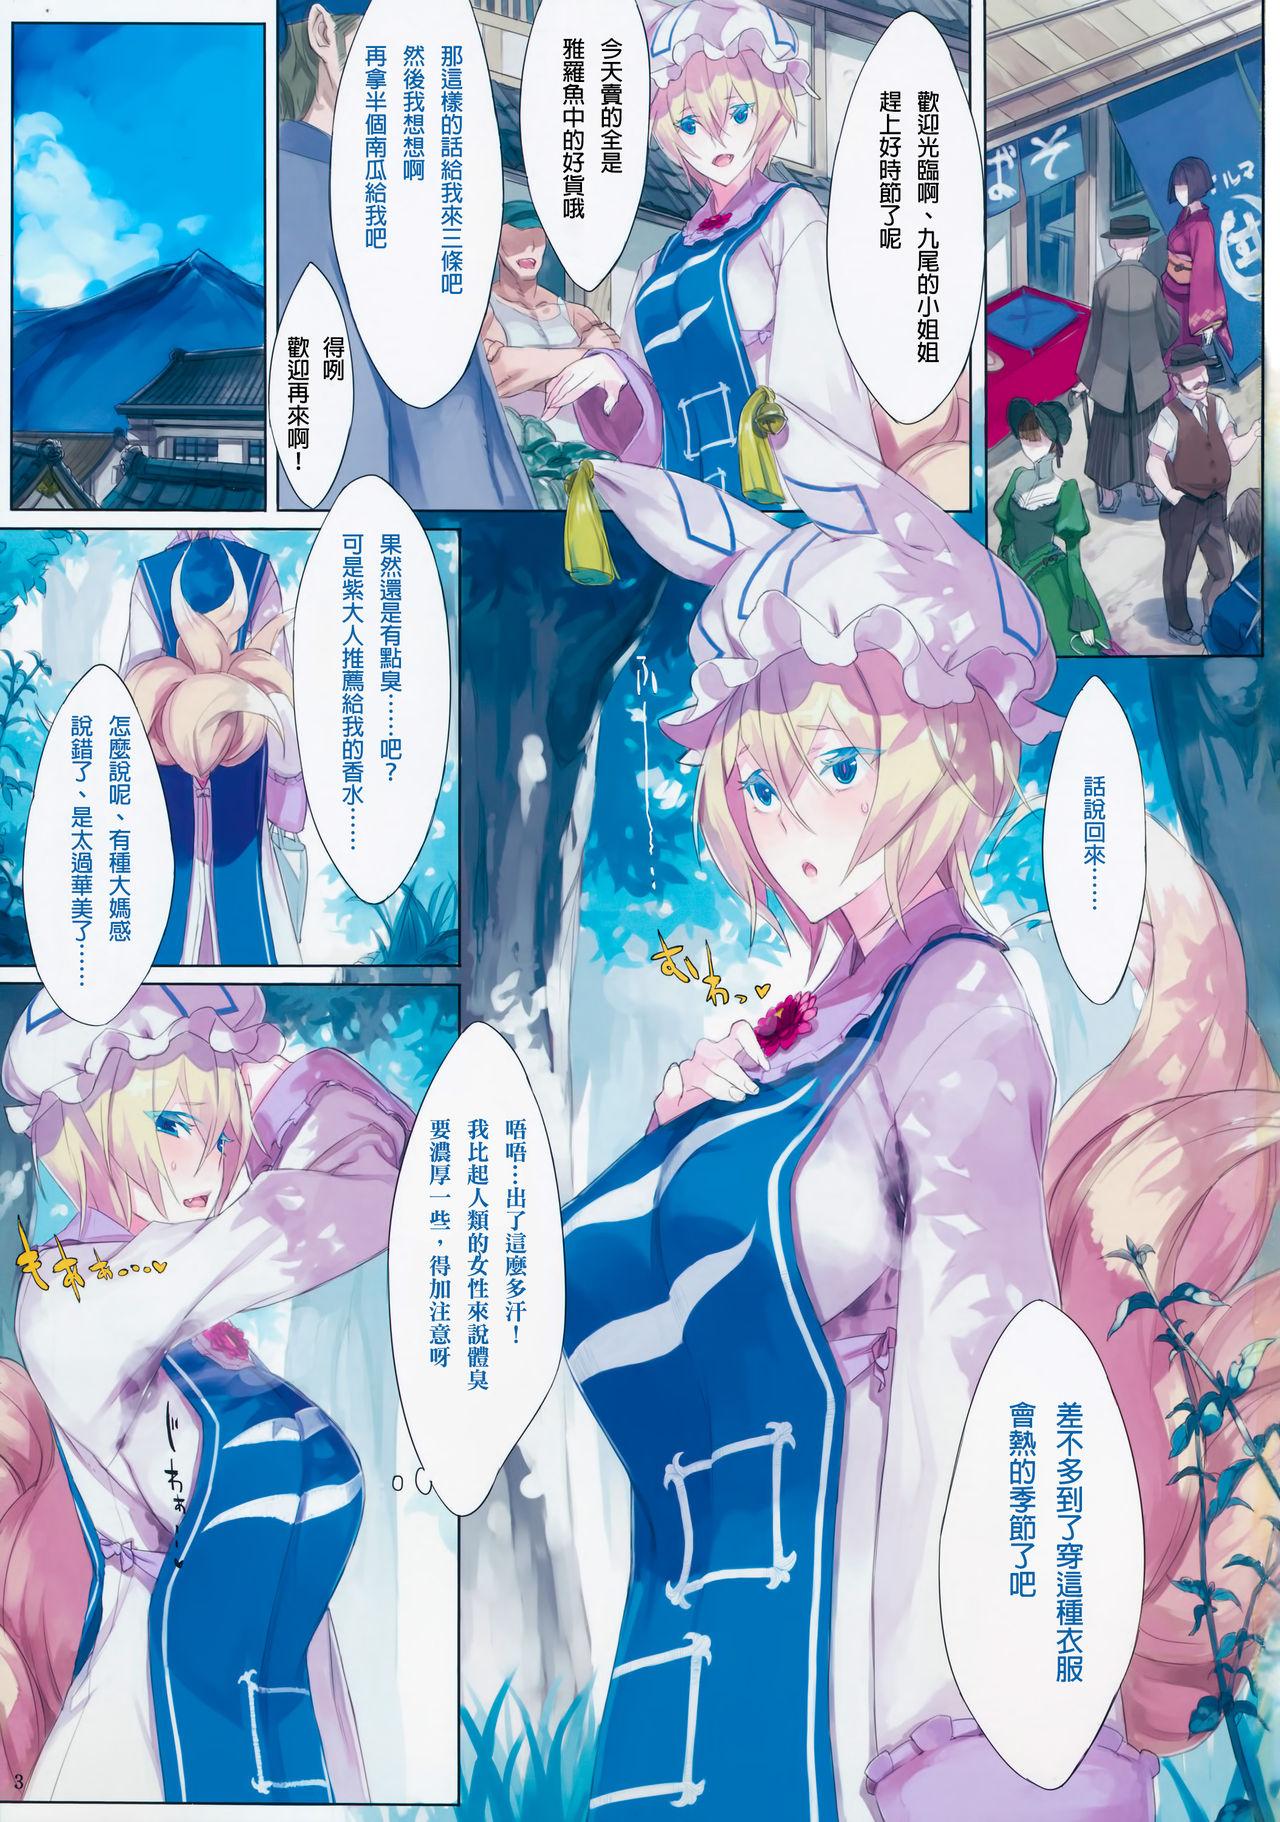 Foursome EL GENSOW tercero - Touhou project Latex - Page 3